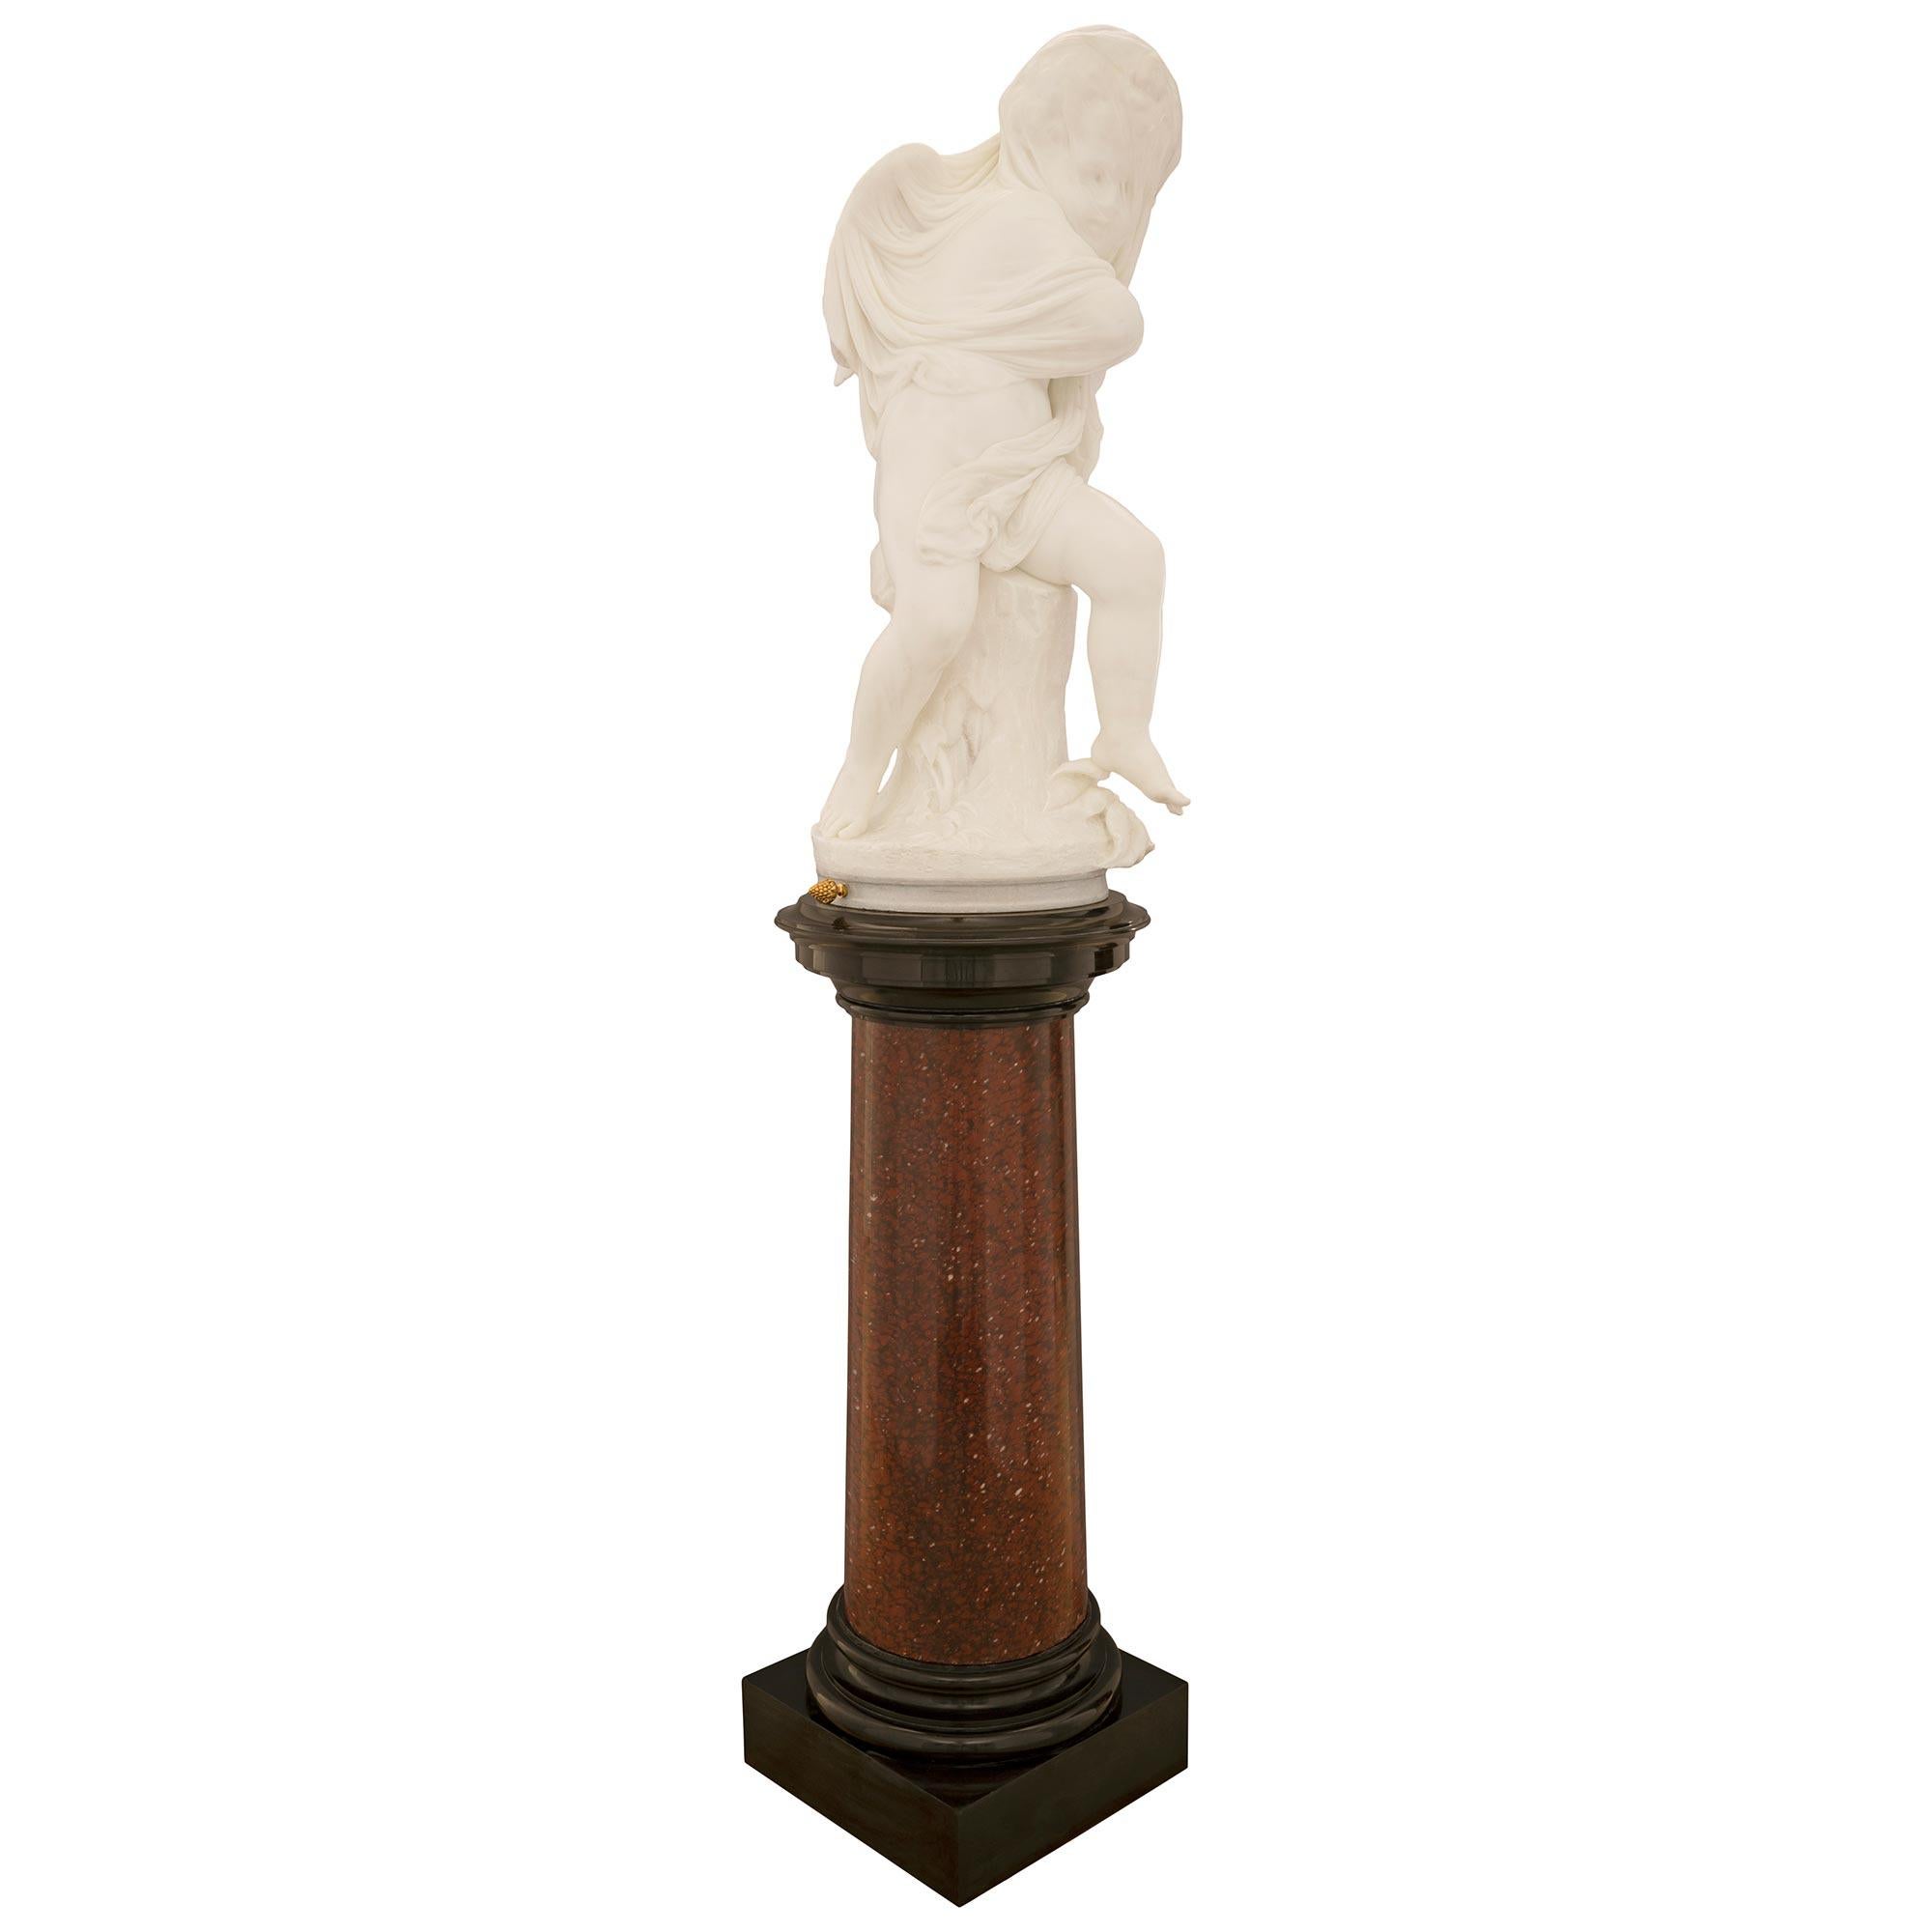 Italian 19th Century White Carrara Marble Statue On Its Original Pedestal  In Good Condition For Sale In West Palm Beach, FL